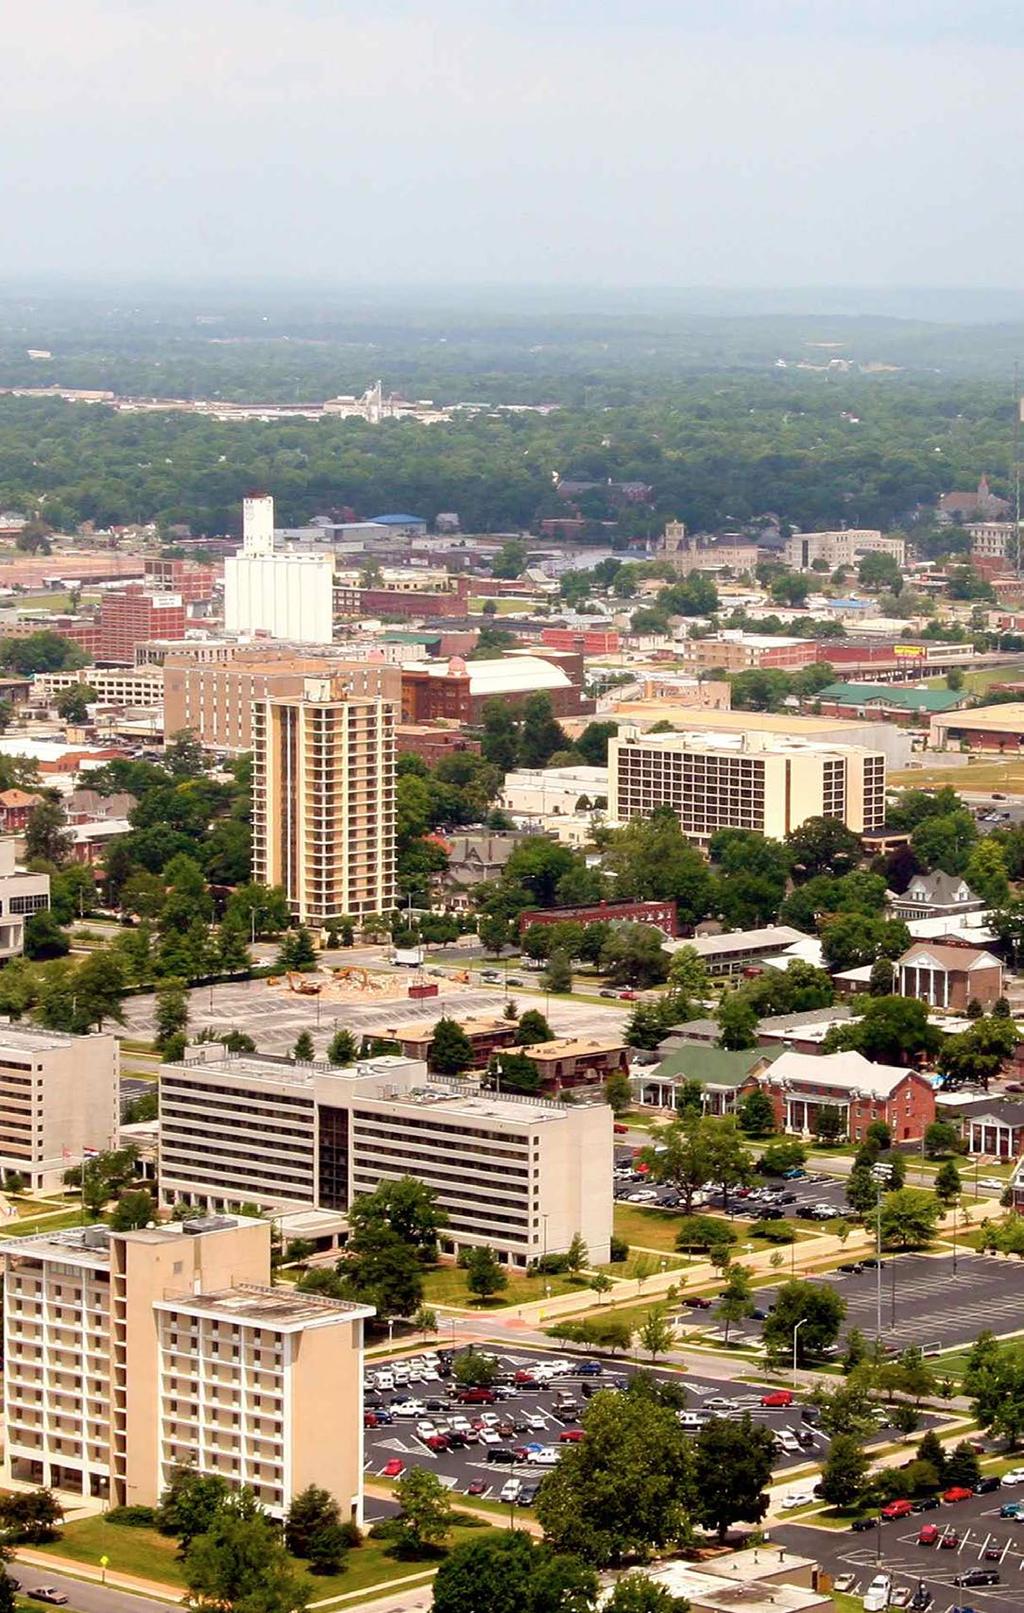 MISSOURI A THRIVING ECONOMY Springfield, the third largest city in Missouri, is a thriving and energetic metropolitan area boasting a wealth of industries and employment opportunities.